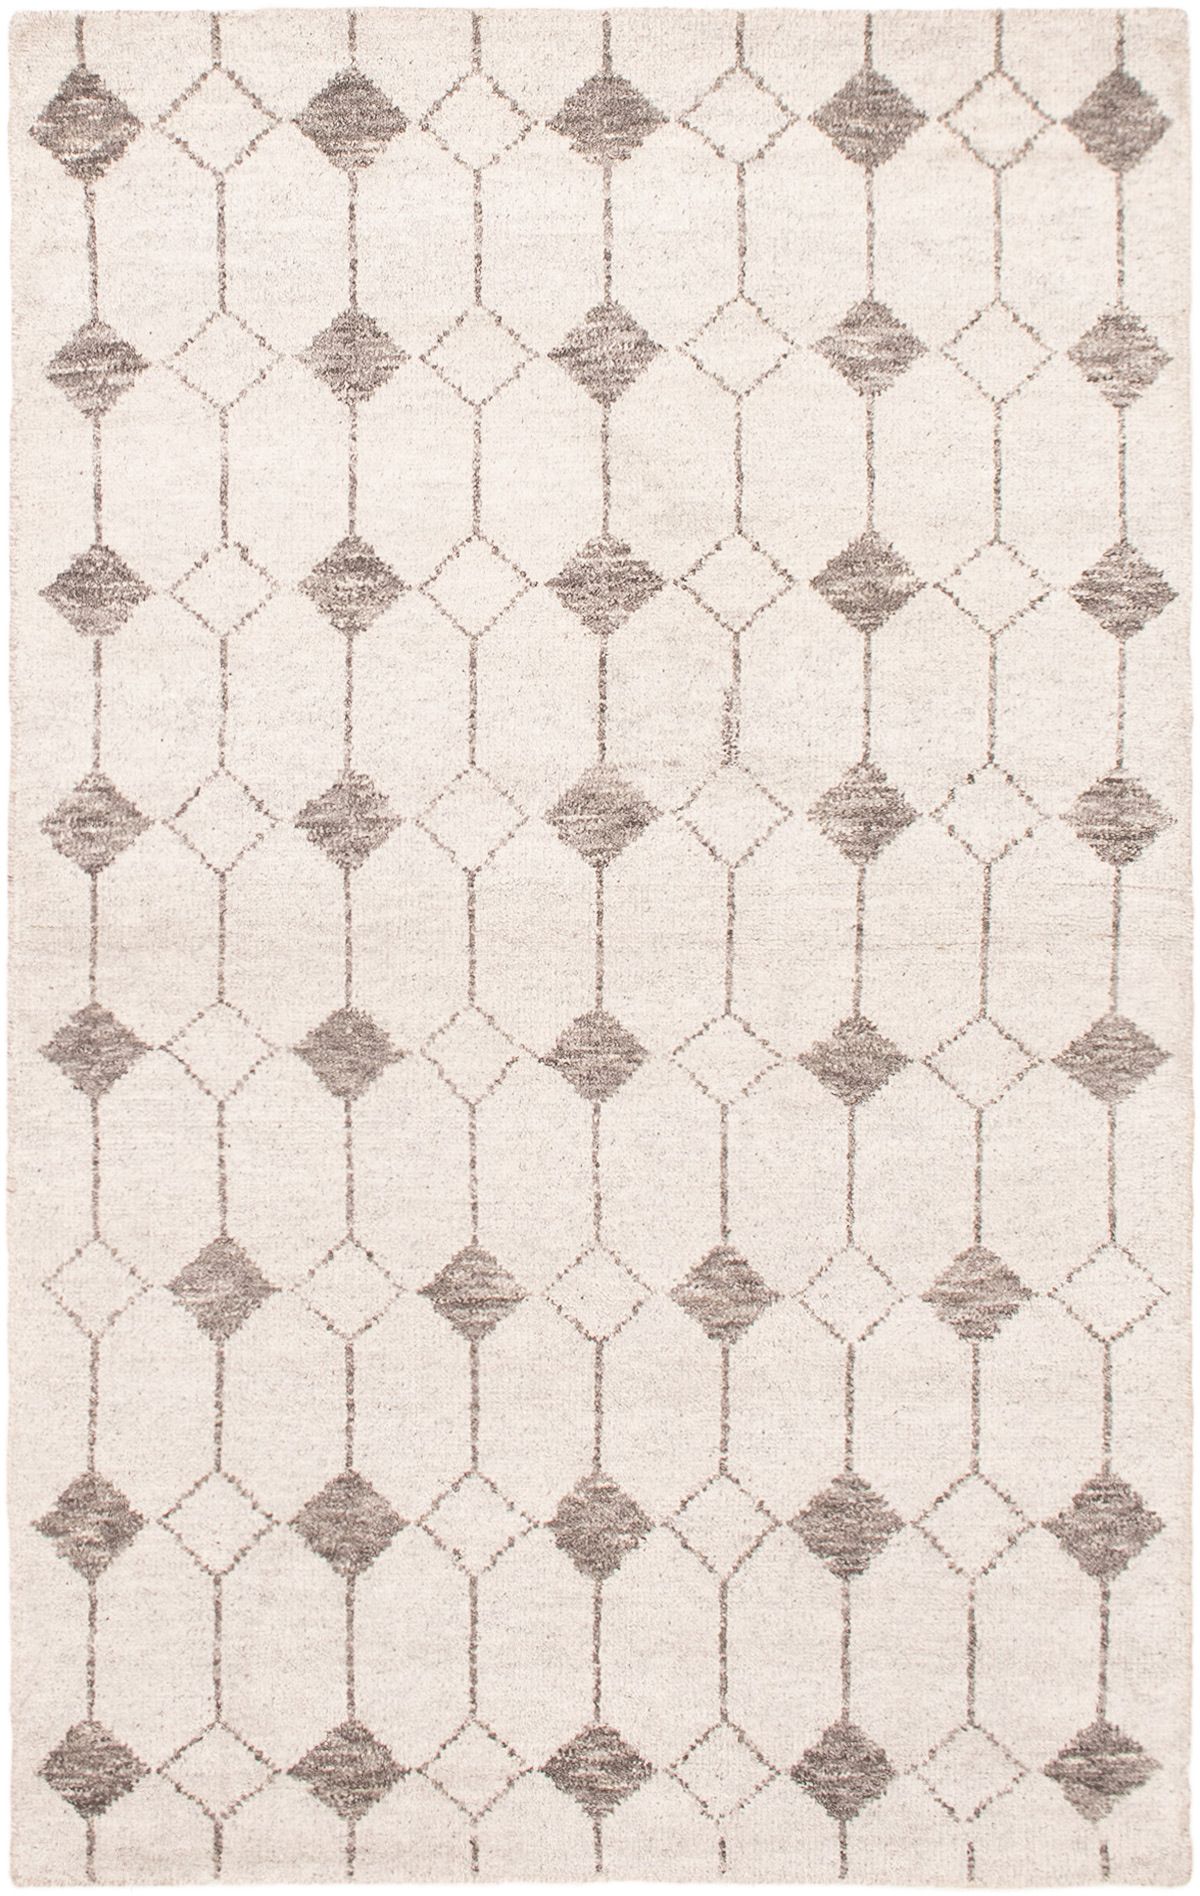 Hand-knotted Tangier Cream Wool Rug 4'11" x 8'0" Size: 4'11" x 8'0"  